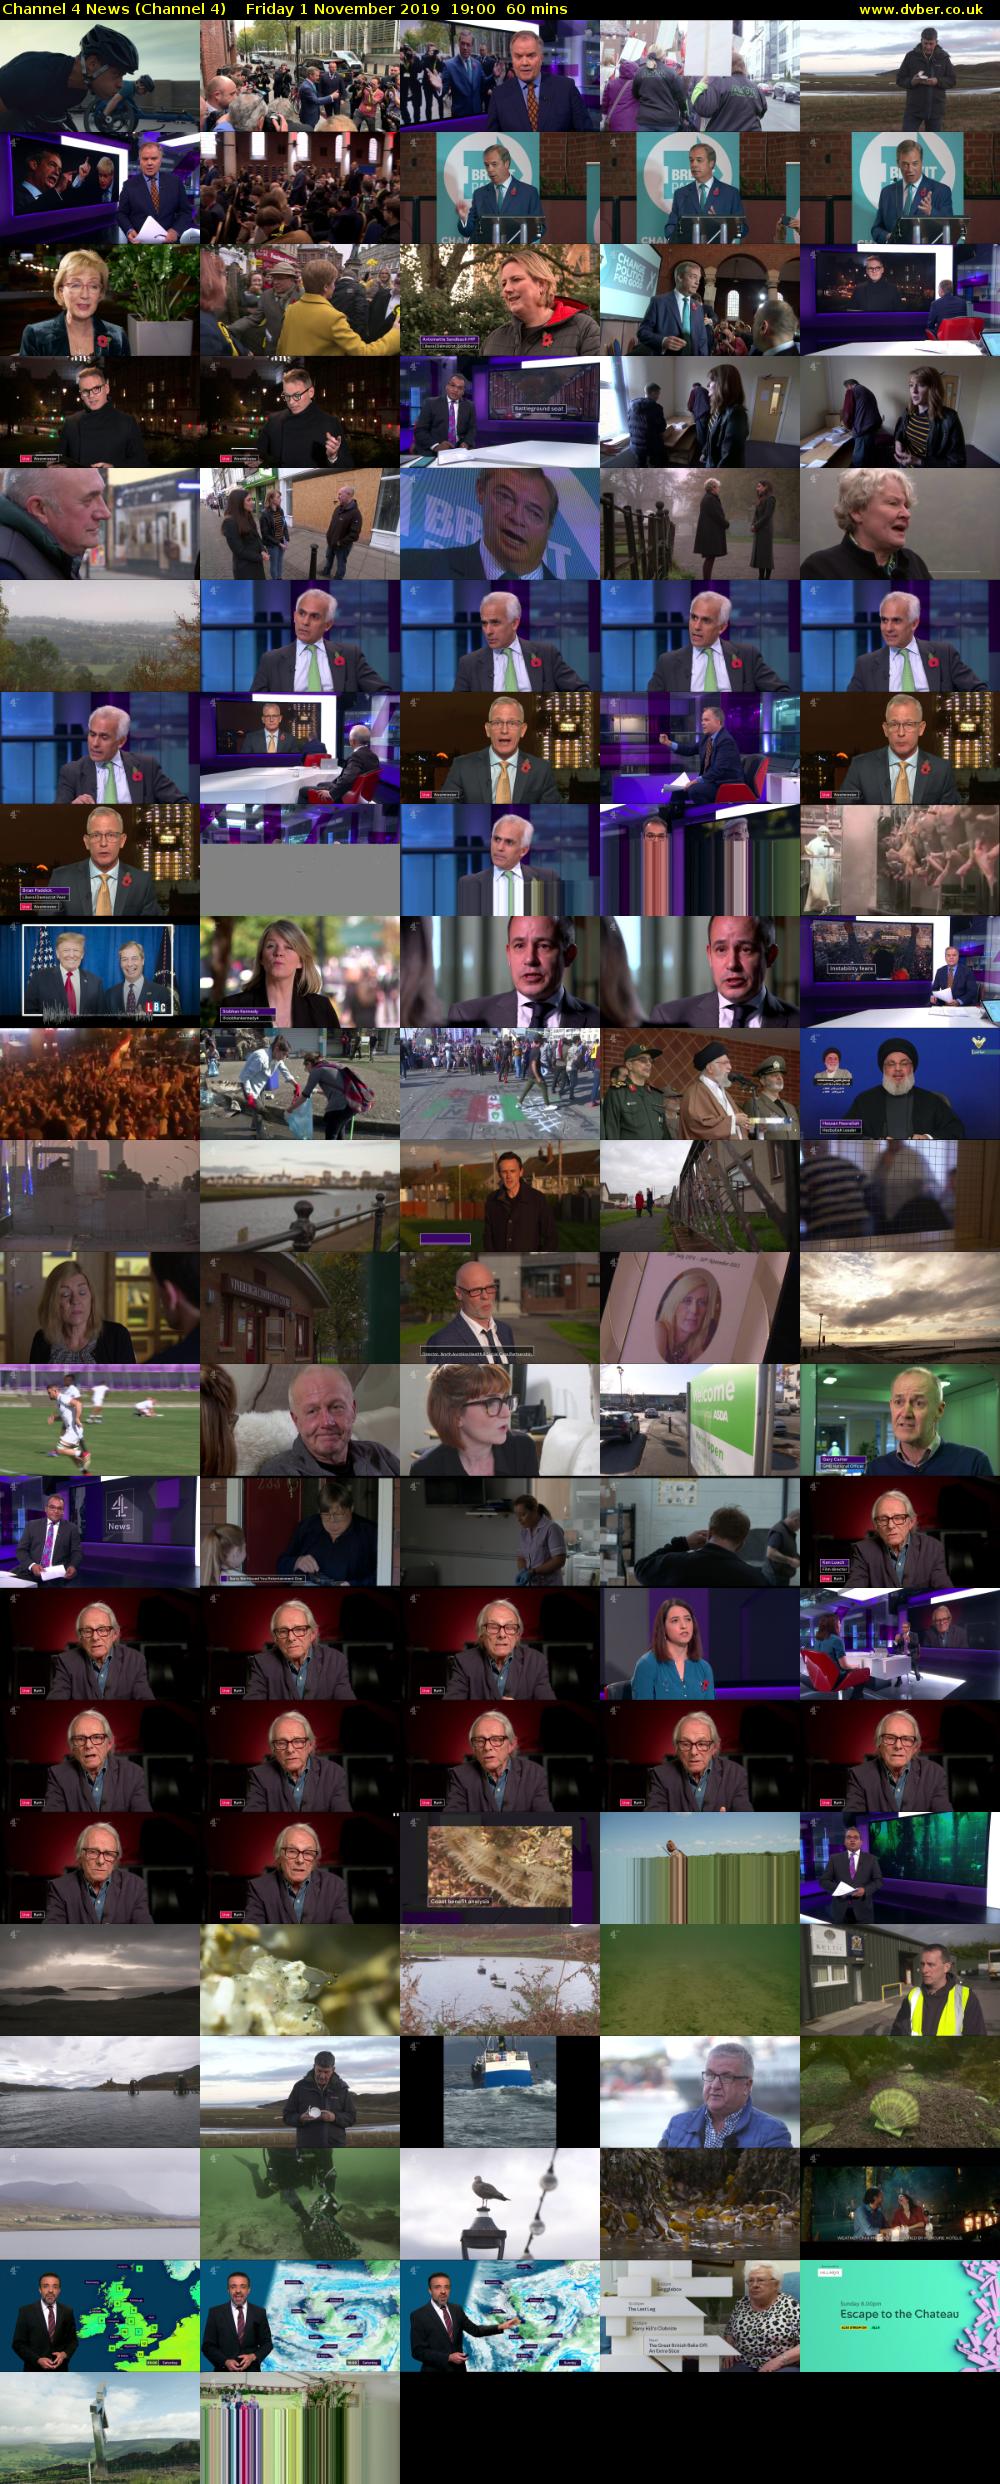 Channel 4 News (Channel 4) Friday 1 November 2019 19:00 - 20:00